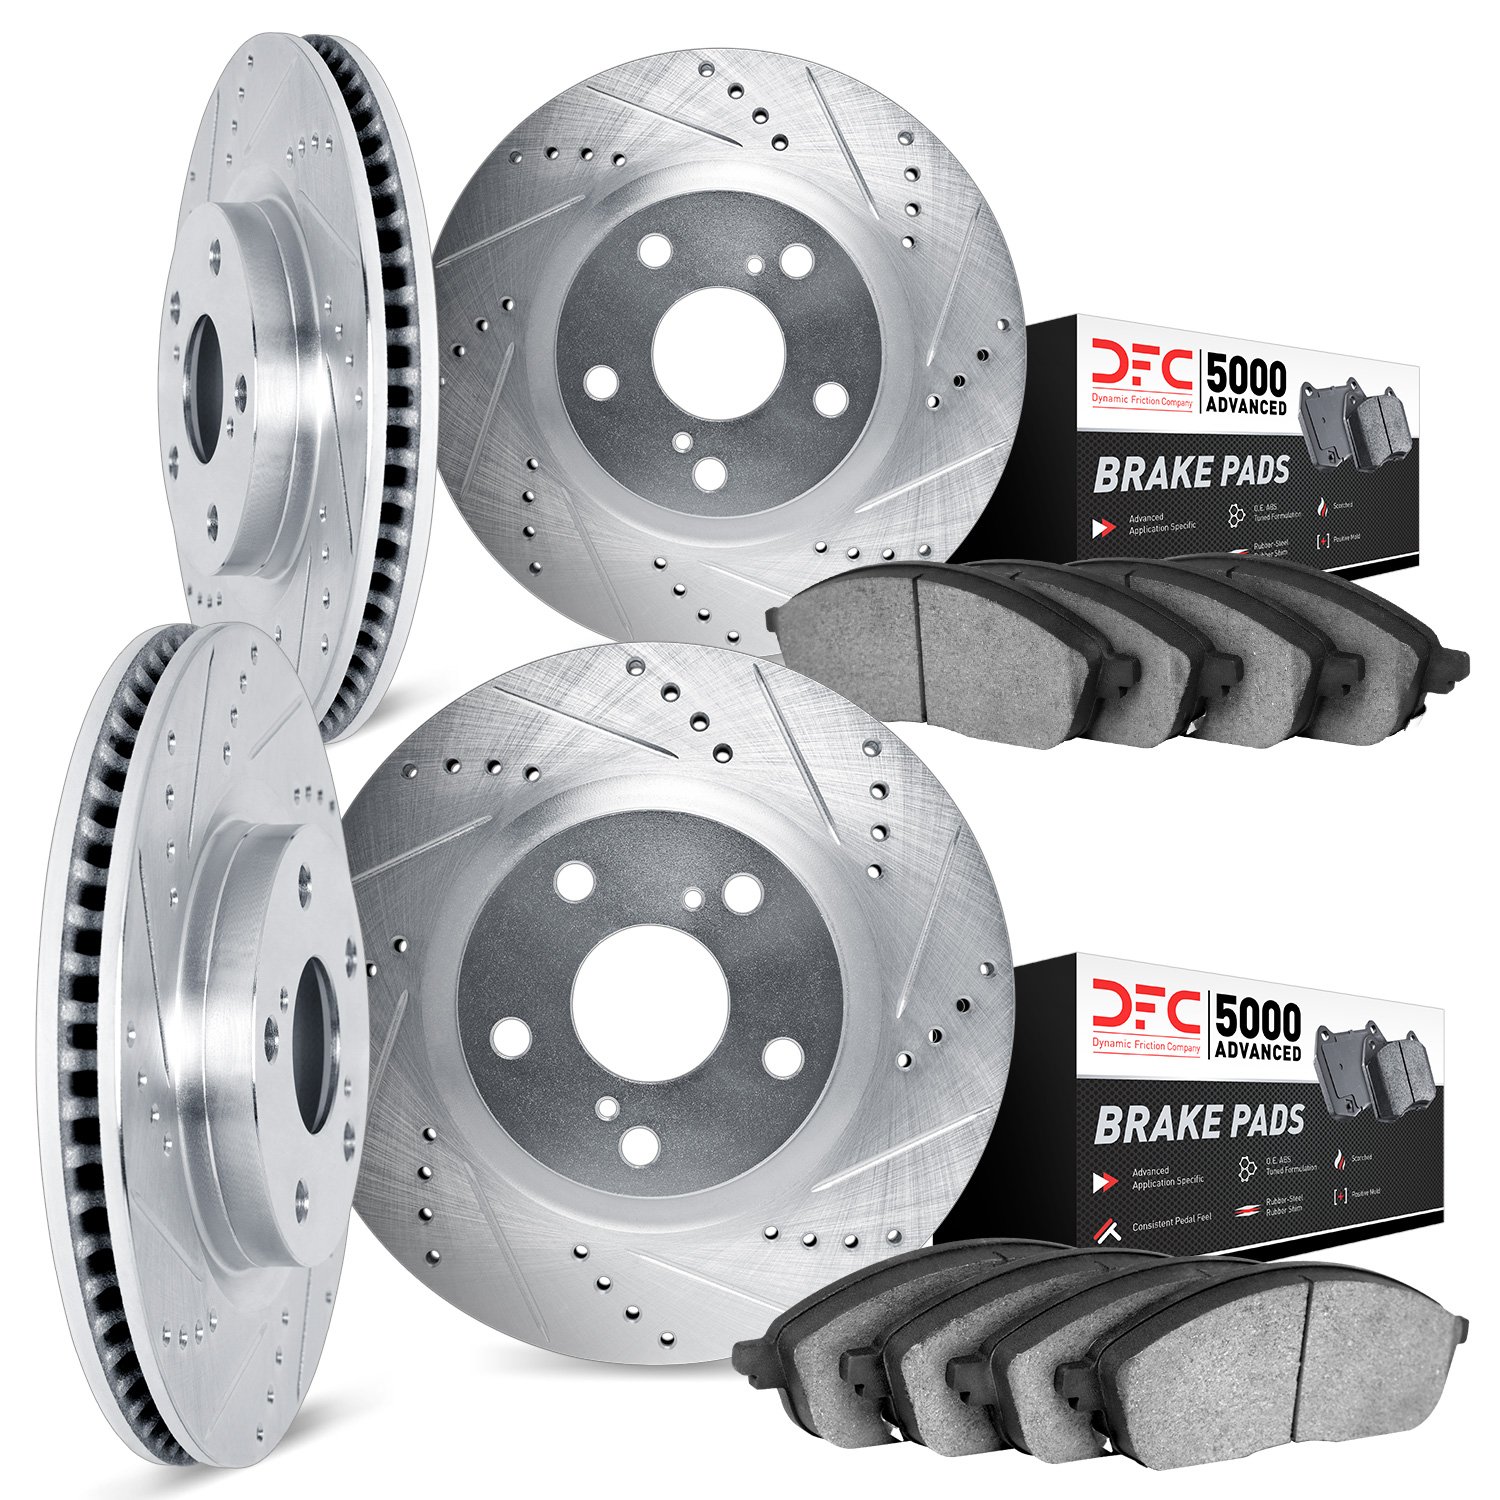 7504-20003 Drilled/Slotted Brake Rotors w/5000 Advanced Brake Pads Kit [Silver], 1998-2003 Jaguar, Position: Front and Rear